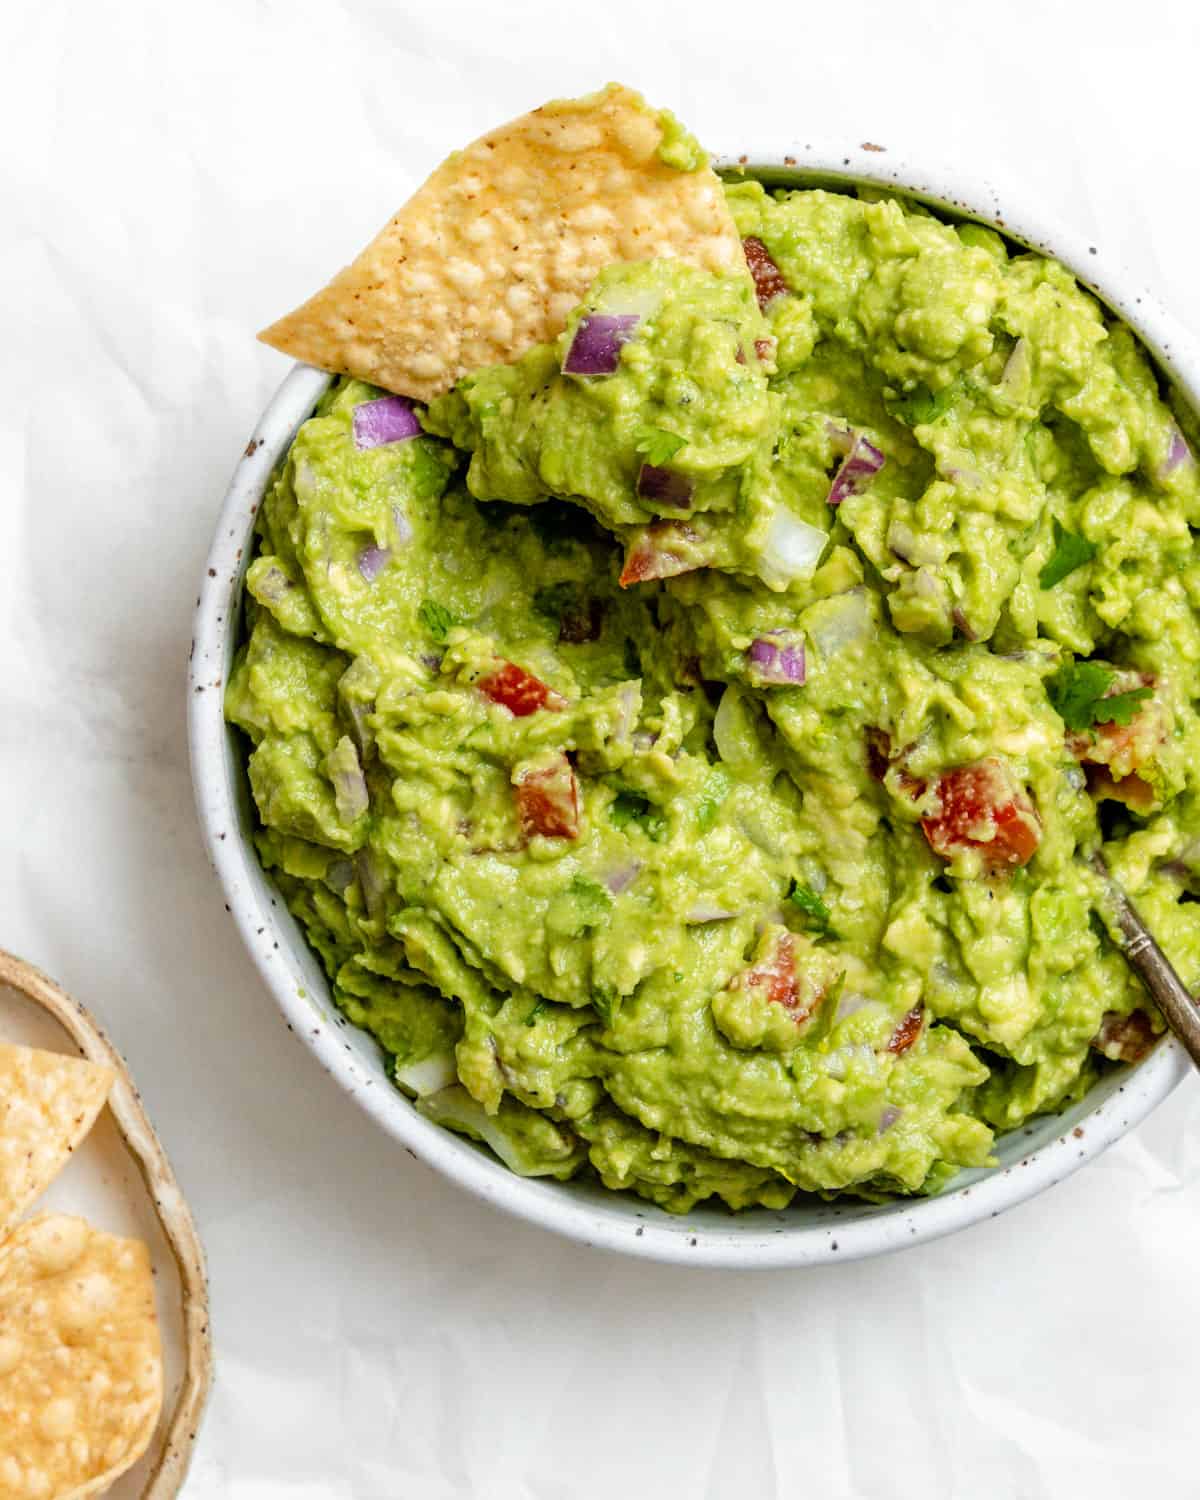 completed Easy Guacamole in a white bowl against a white background